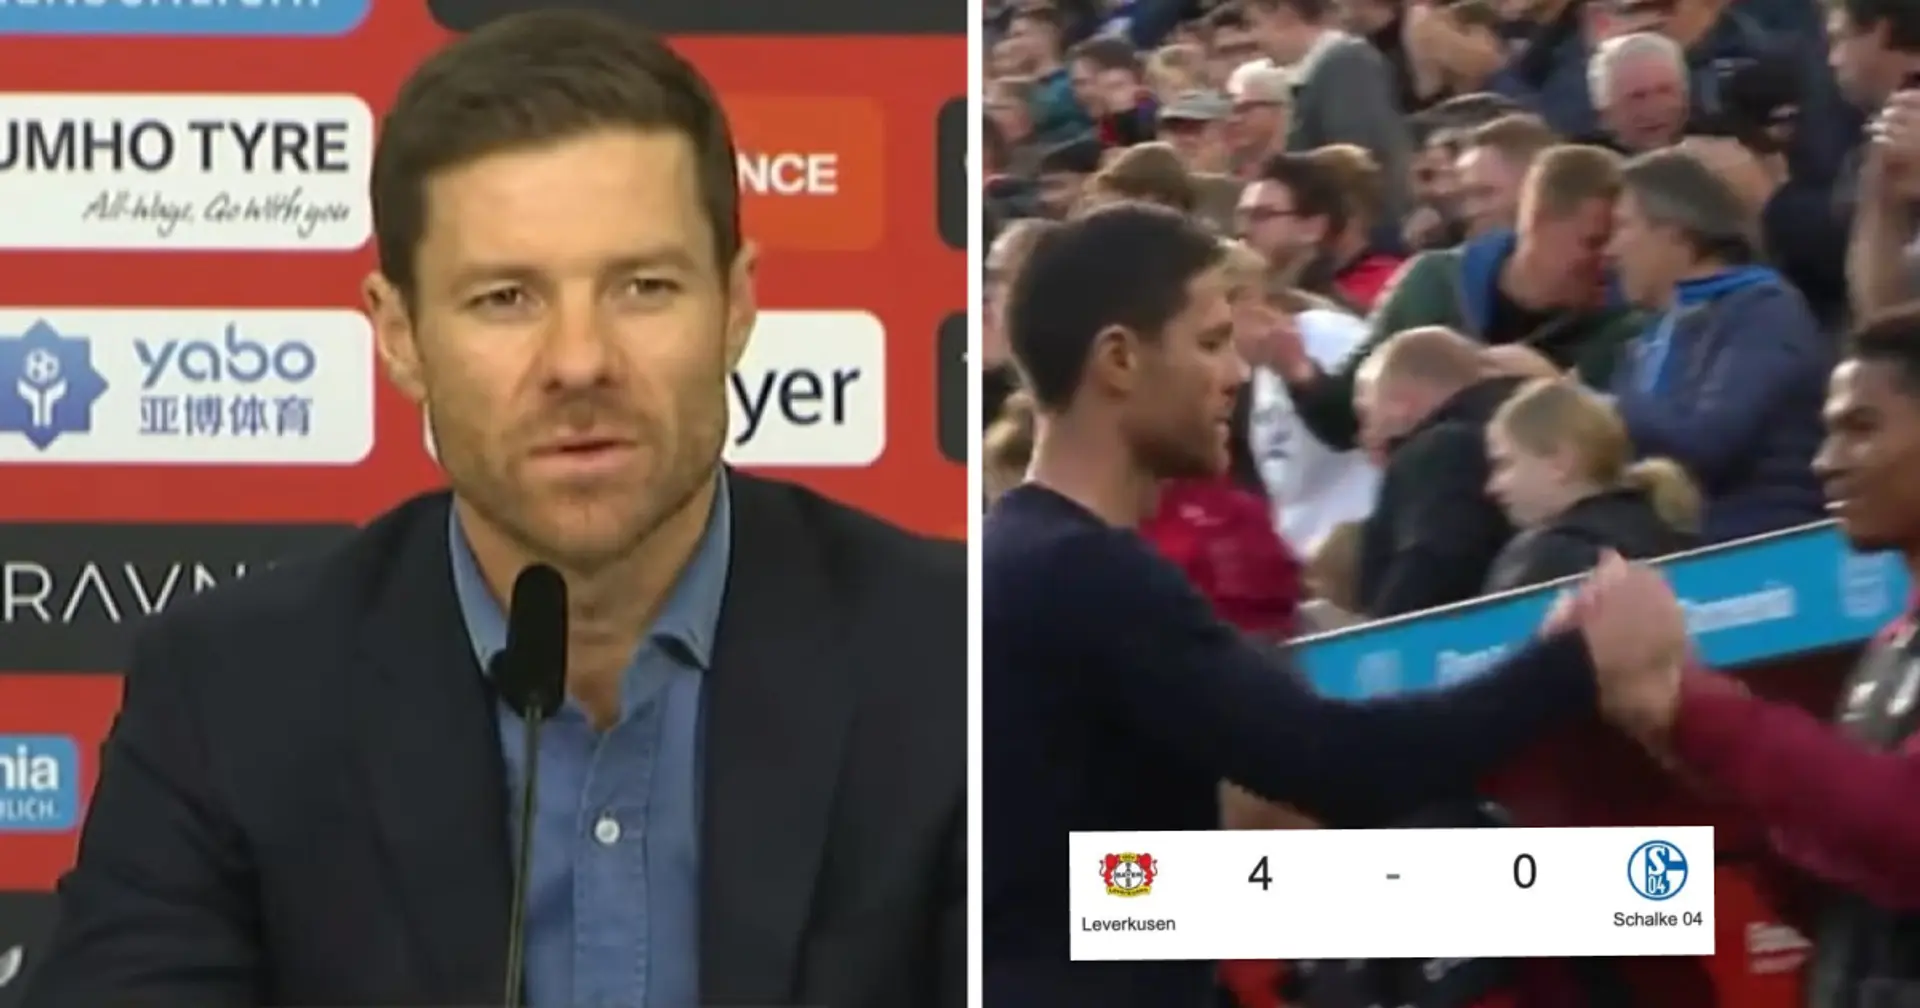 Xabi Alonso leads Leverkusen to 4-0 win in first game — they had no wins in 4 games before his appointment